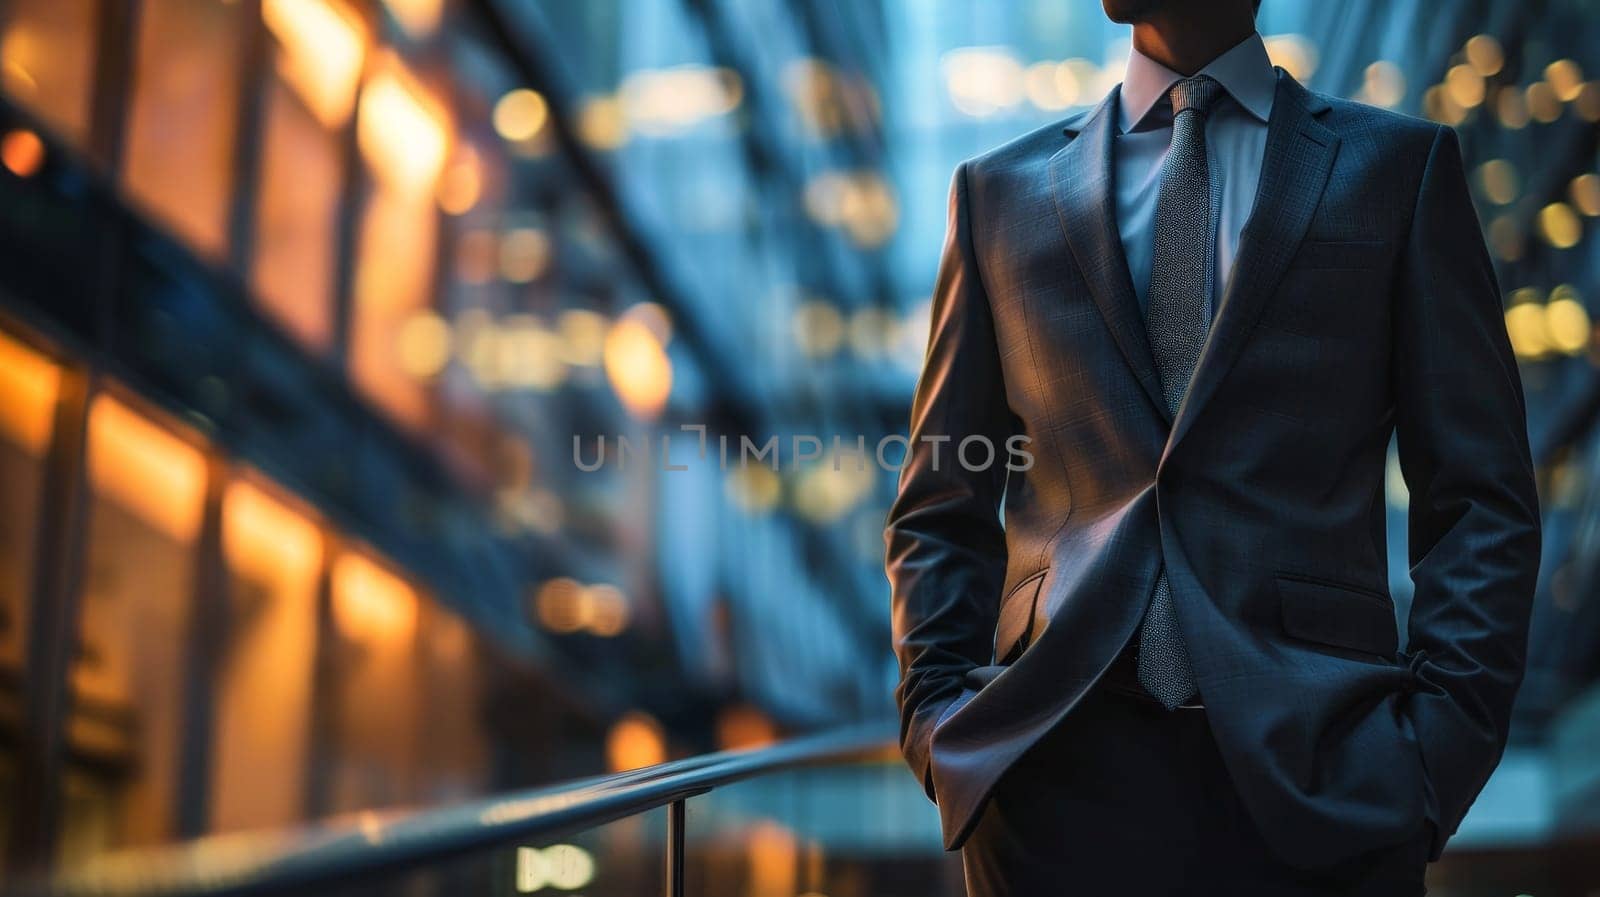 A man in a suit and tie stands on a balcony in a city. Concept of professionalism and sophistication, as the man is dressed in a business suit and tie